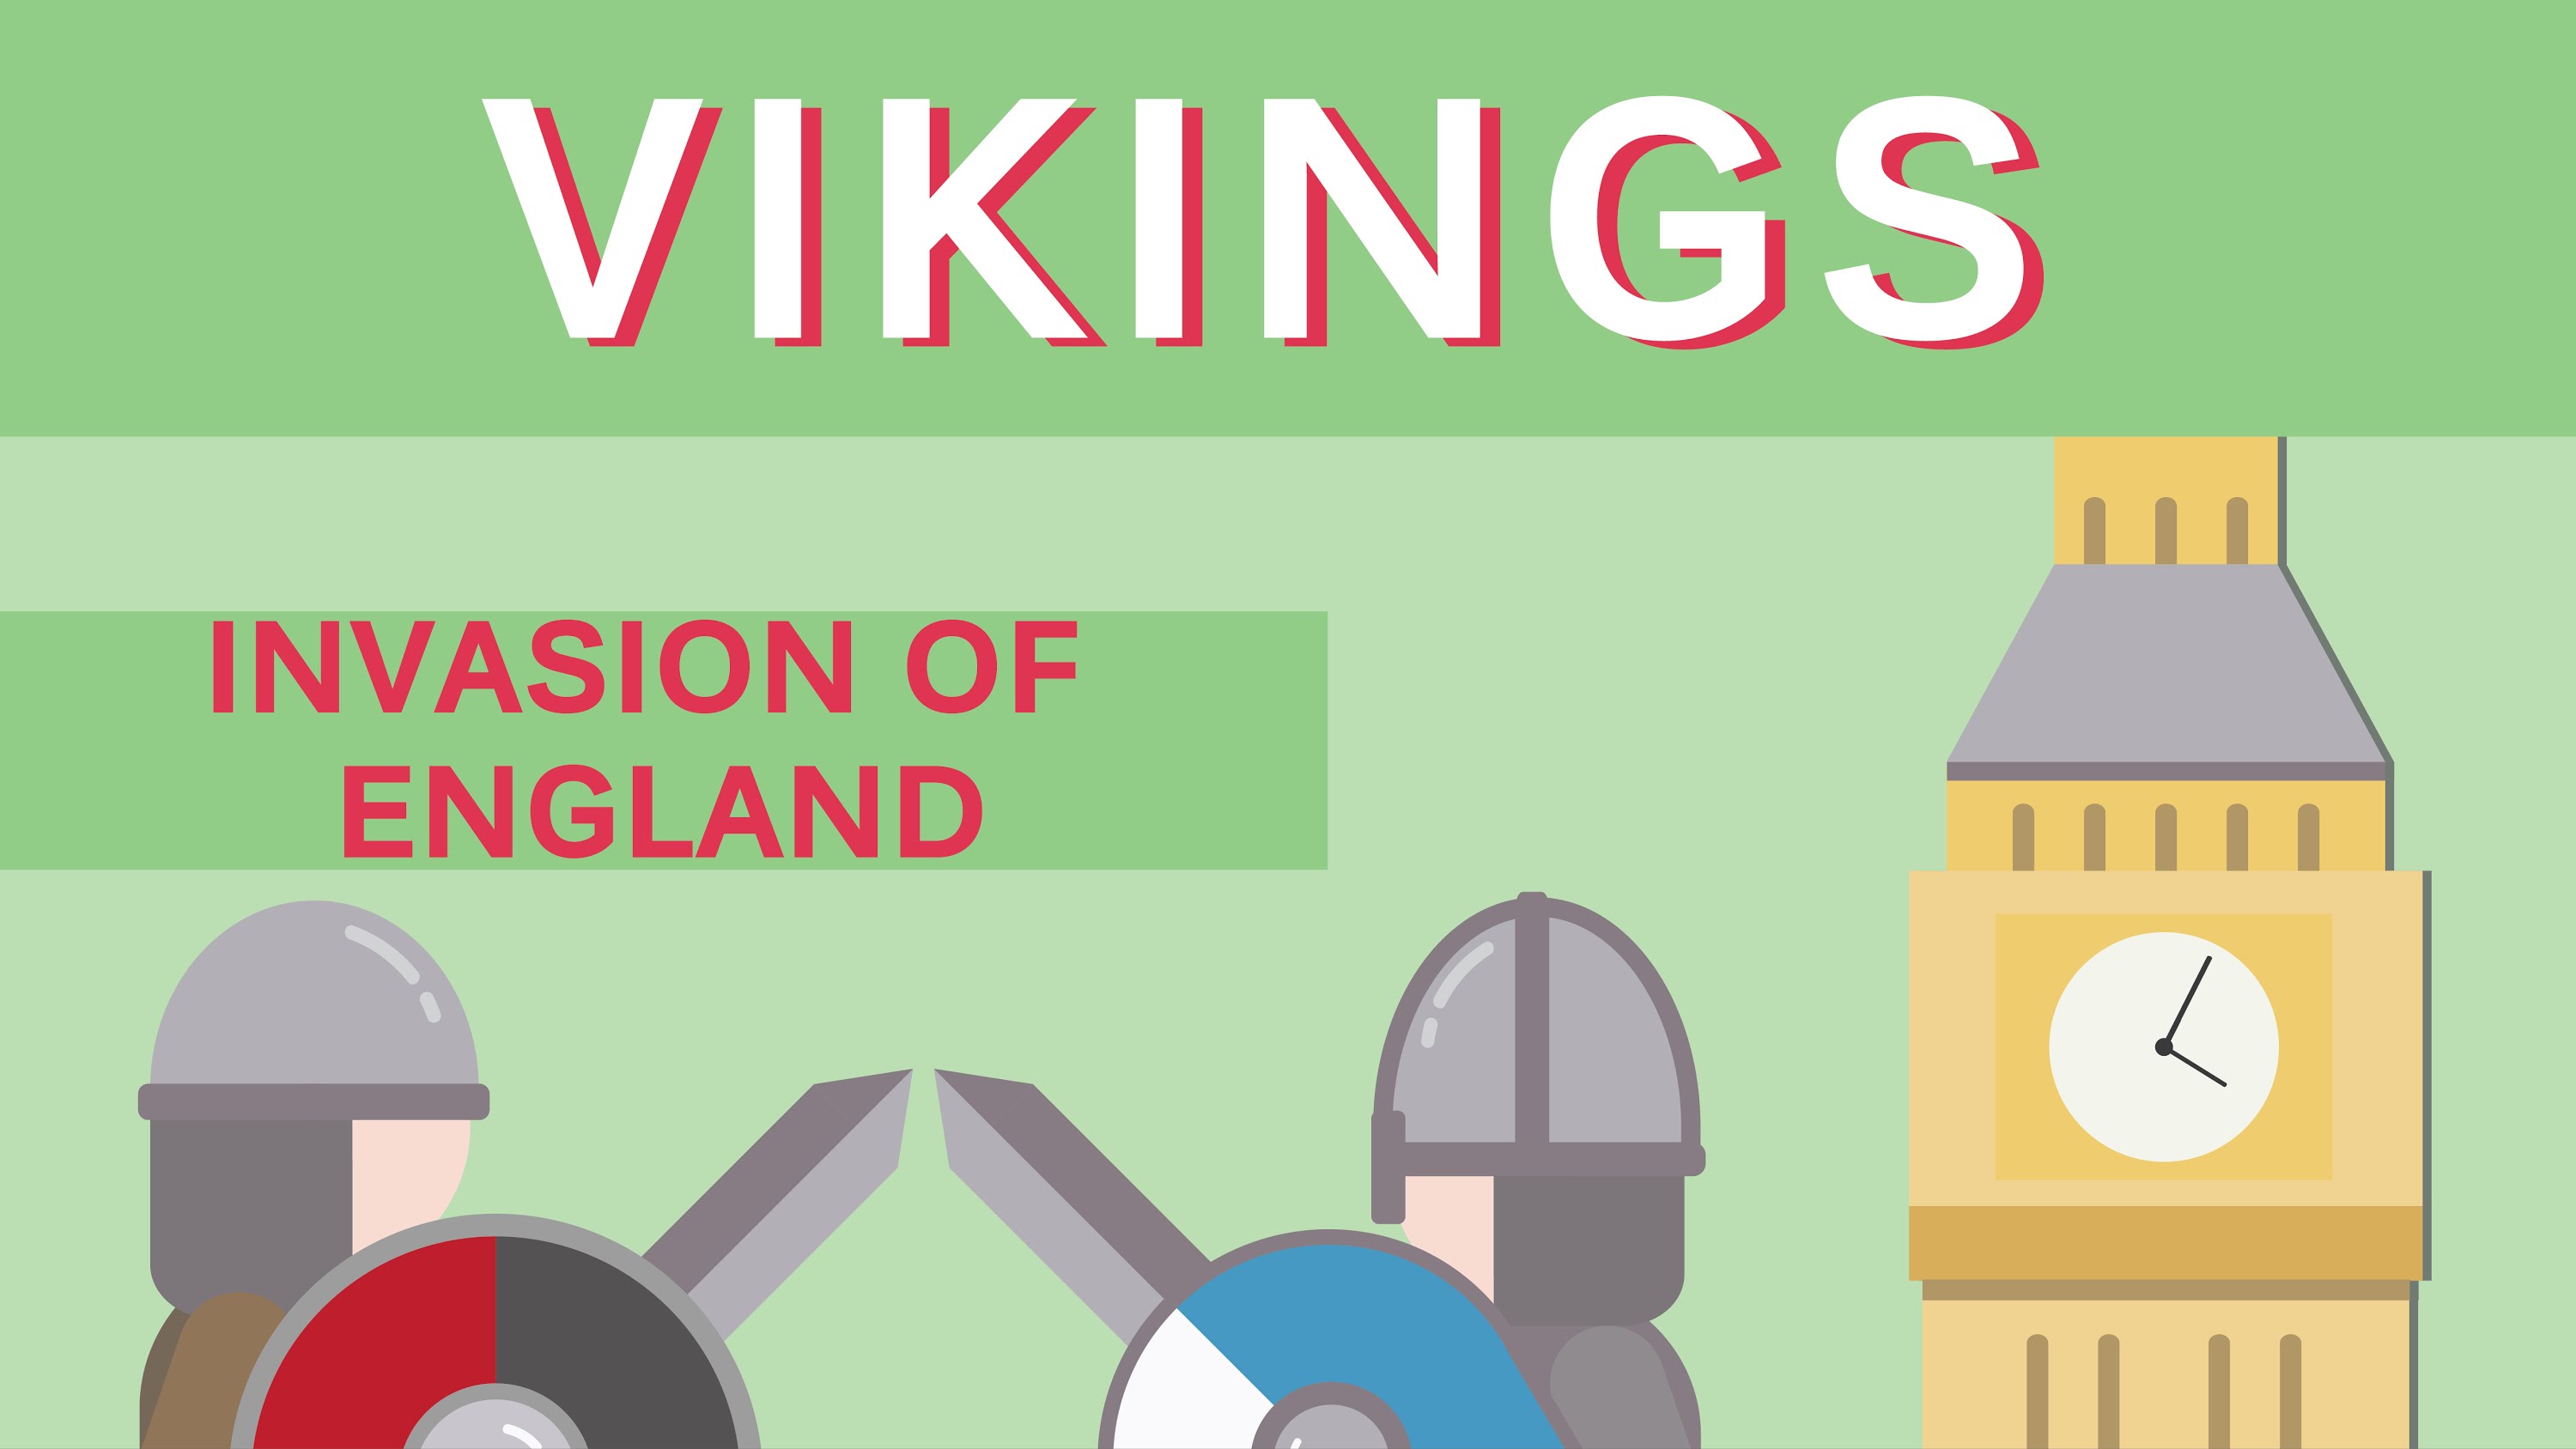 VIKINGS - III: Invasion of England | Norman Conquest of England ...